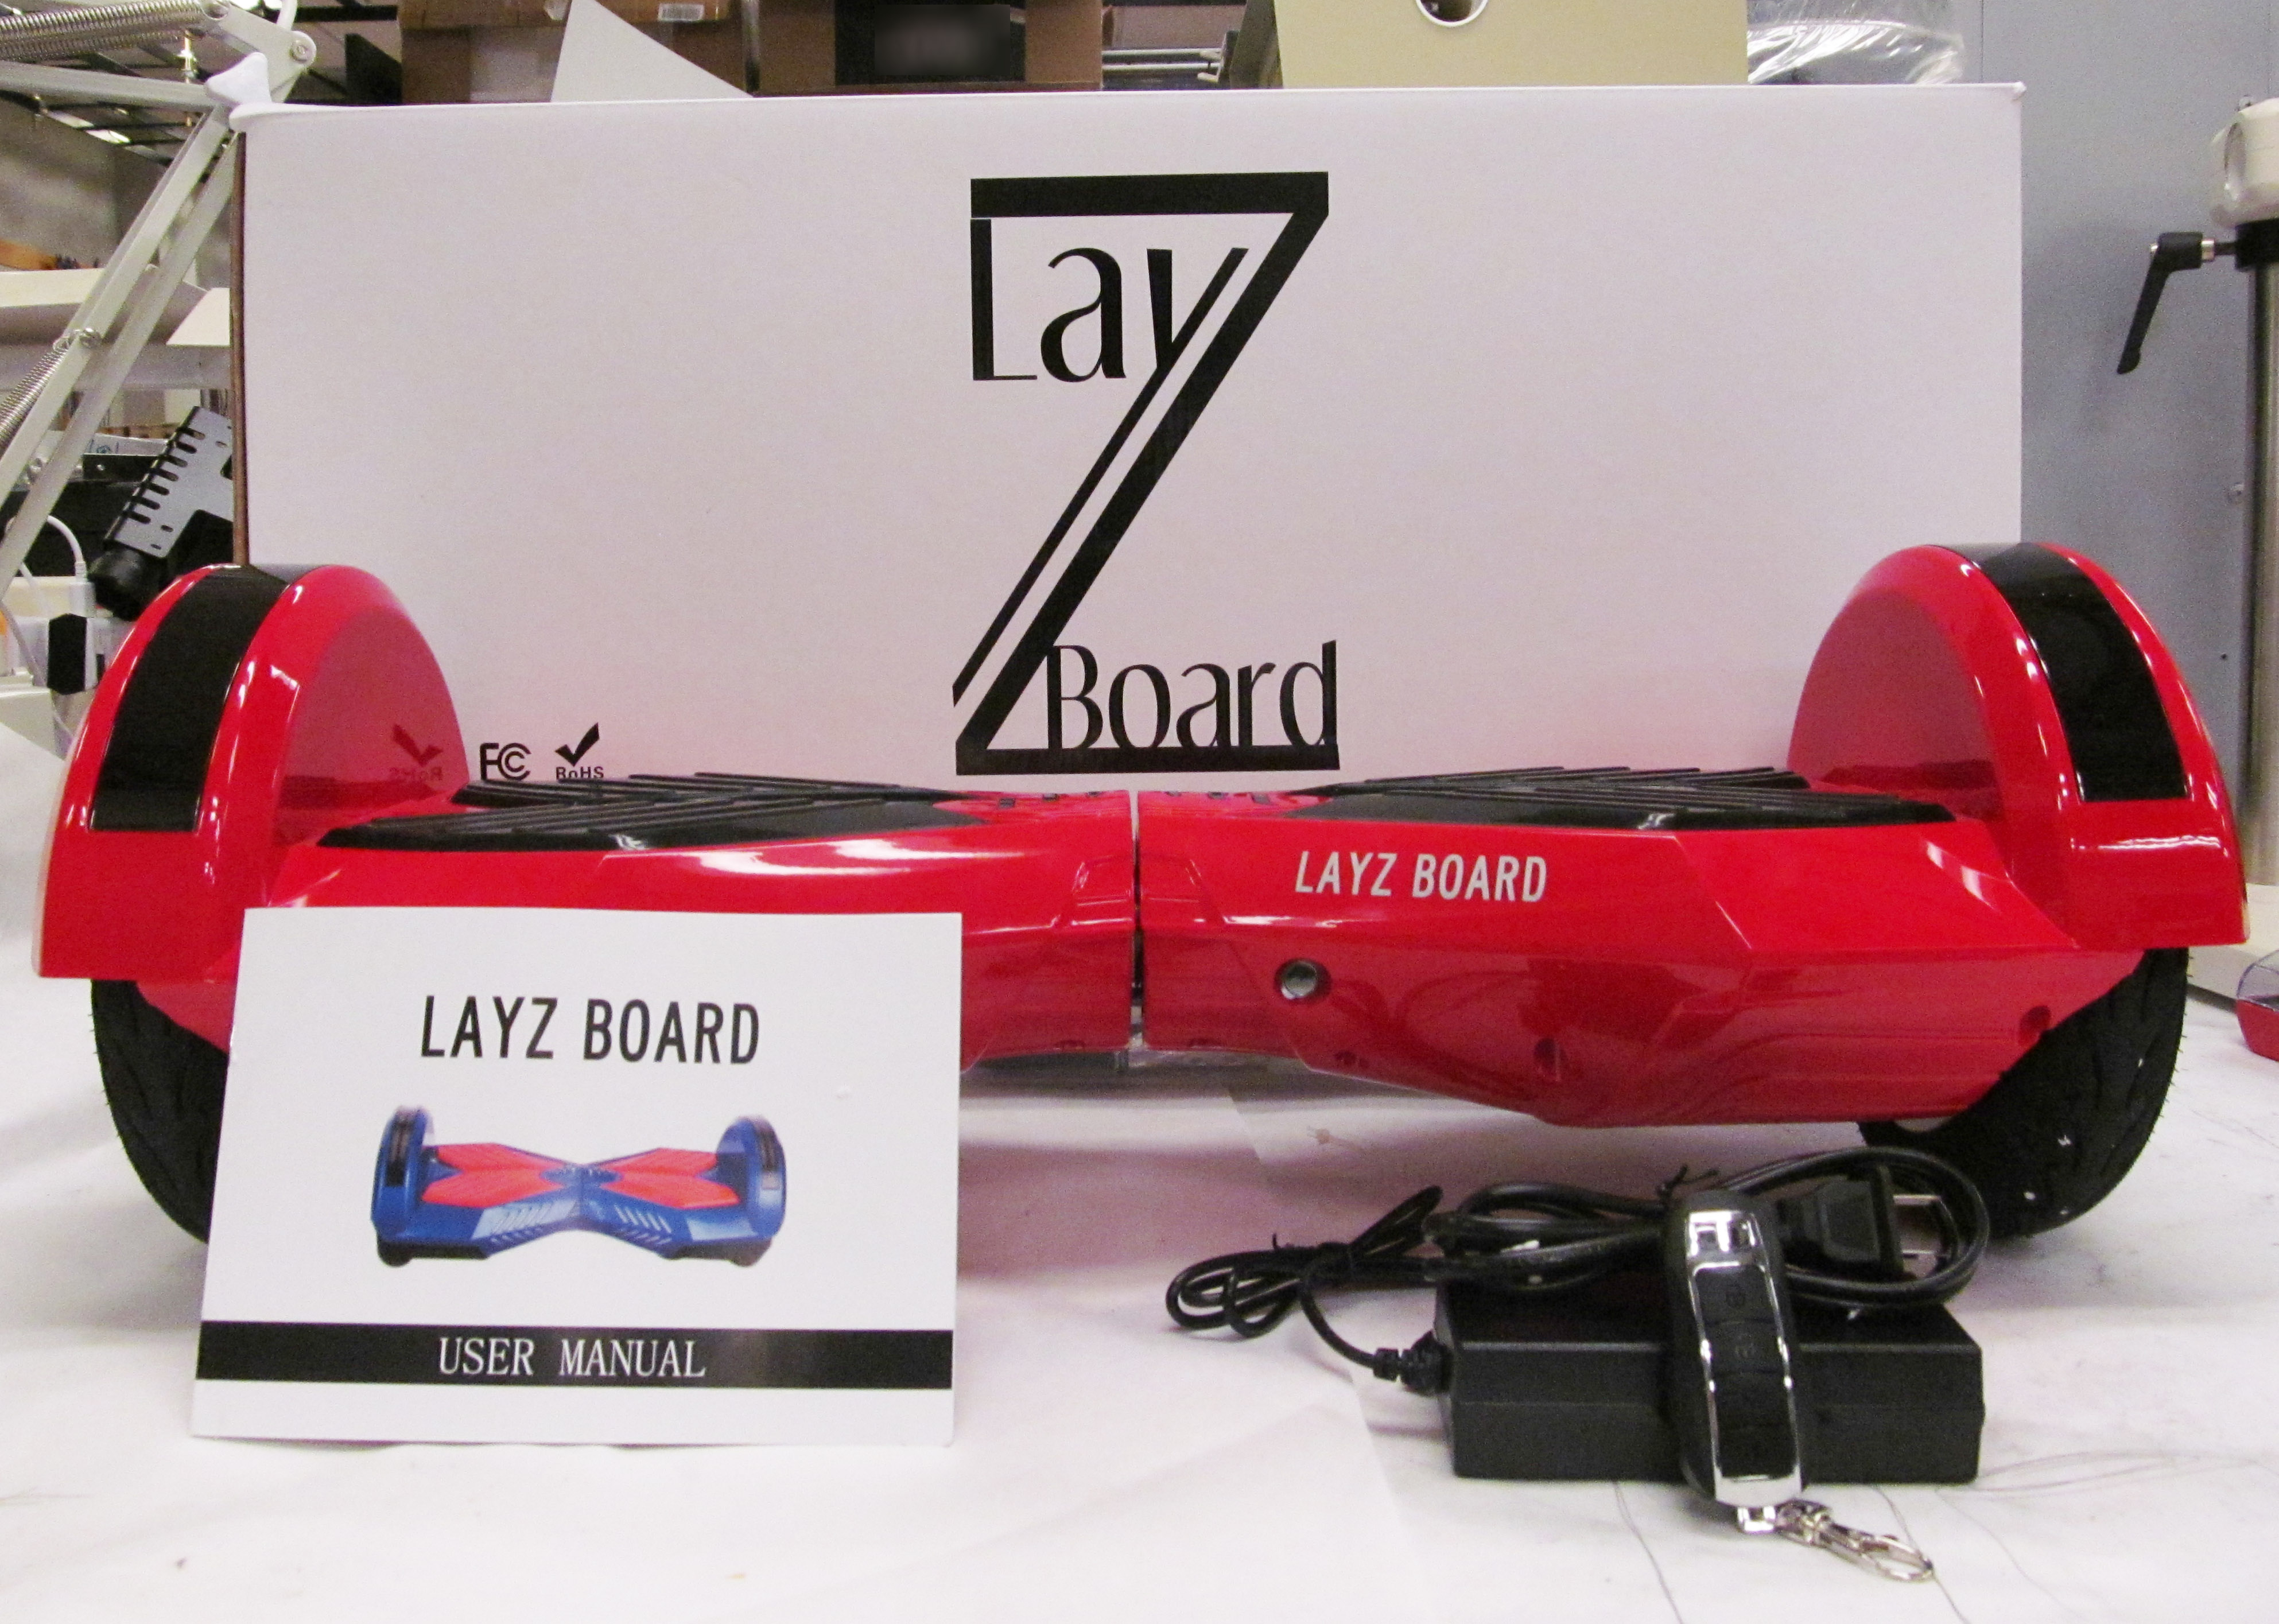 After Deadly Fire, Government Warns Against Using LayZ Board Hoverboards